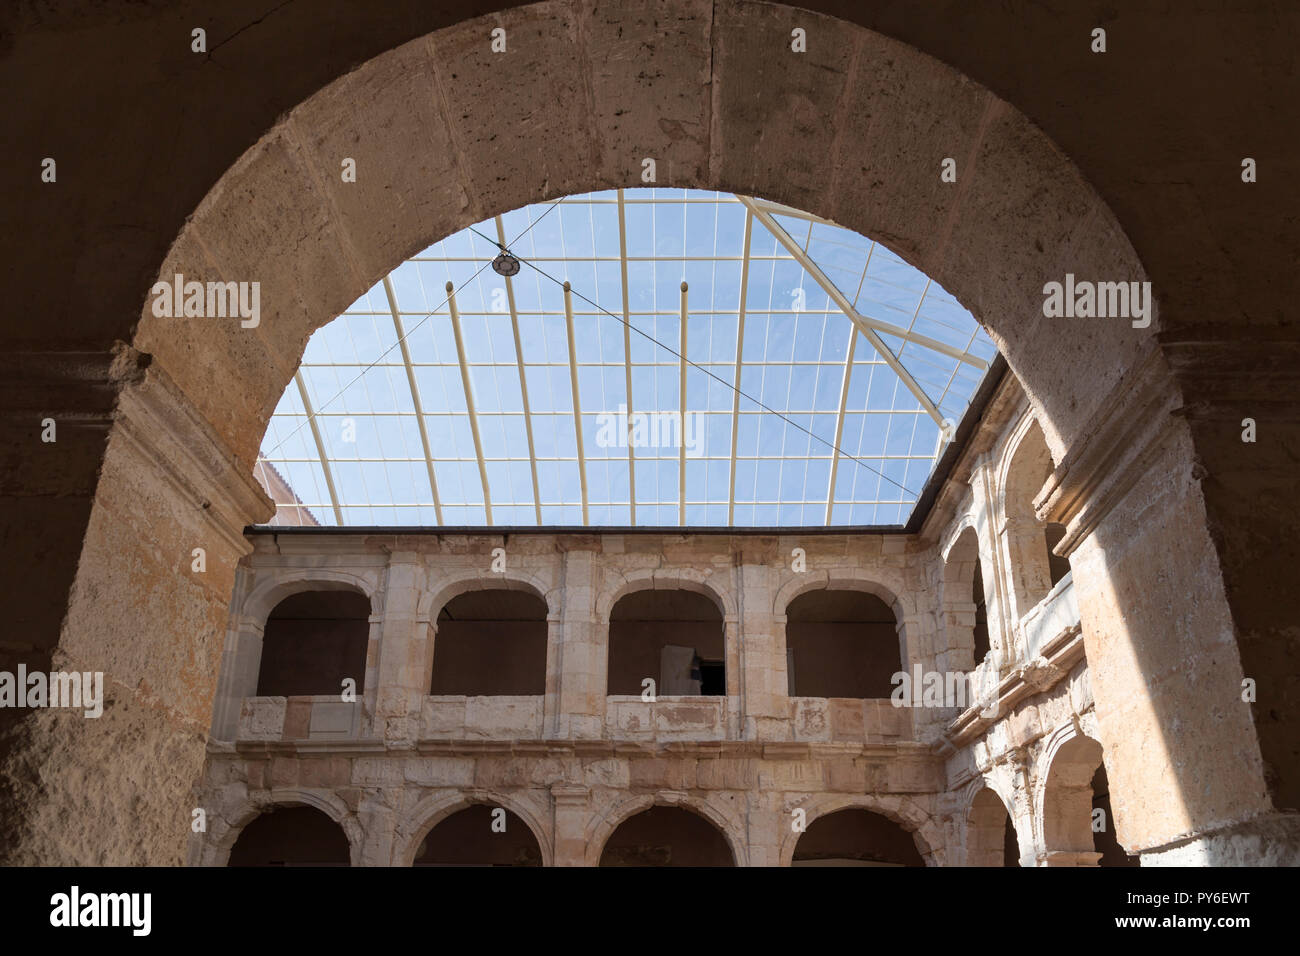 View through one of the arches of the courtyard of the Palace of the Dukes of Medinaceli in Medinaceli, Soria, Spain Stock Photo